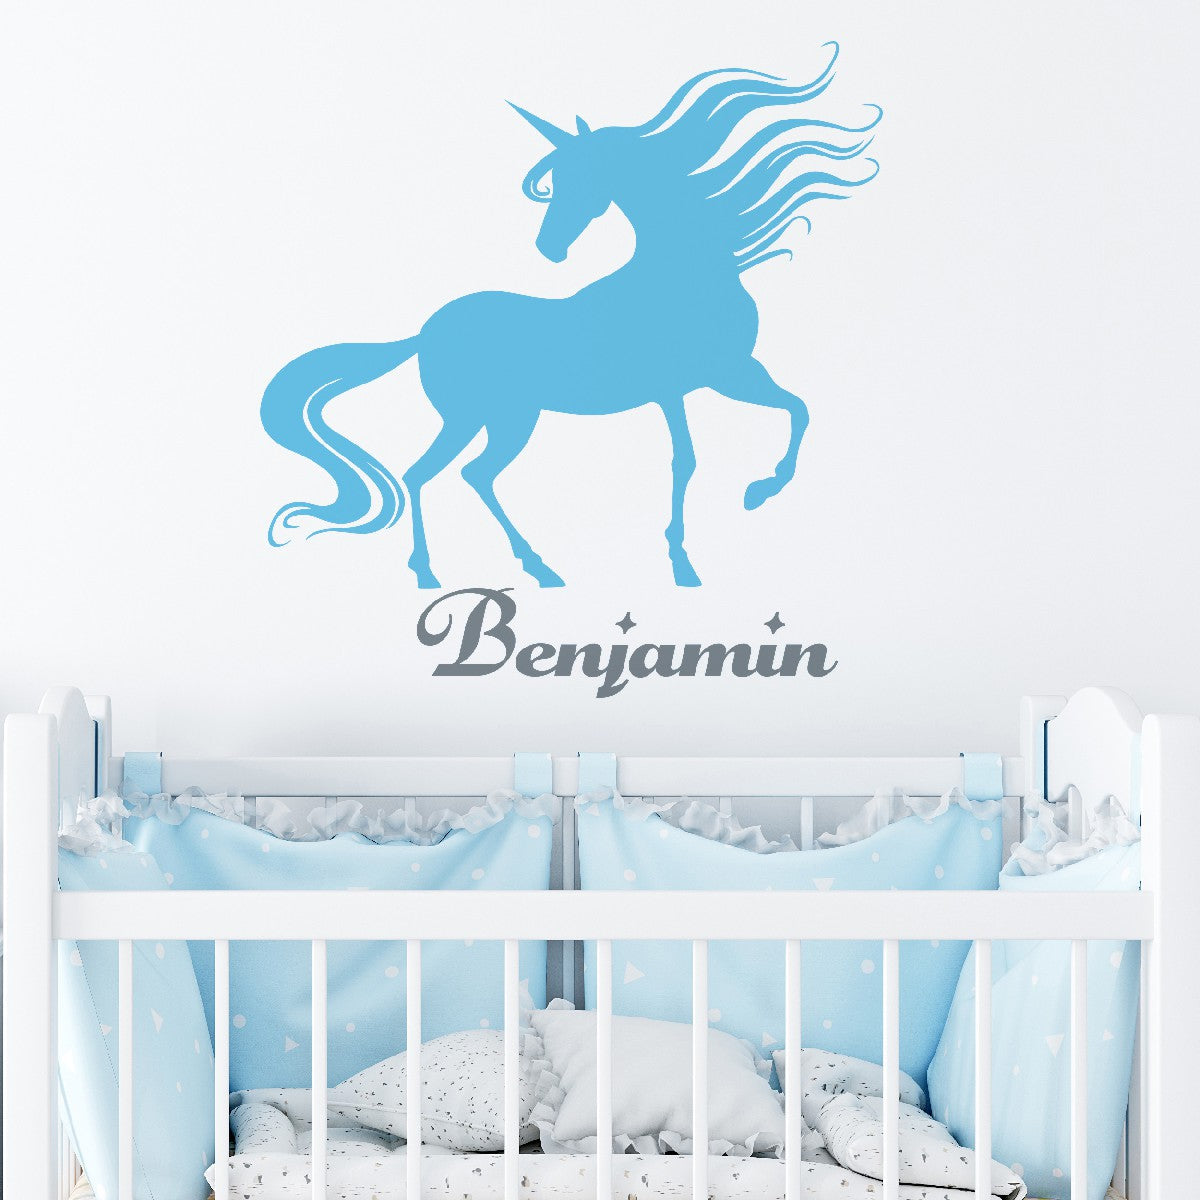 Personalized Unicorn Vinyl Stickers - Featuring Your Child's Name and Whimsical Imagery - Unicorn Room Wall Decor with Custom Monograms